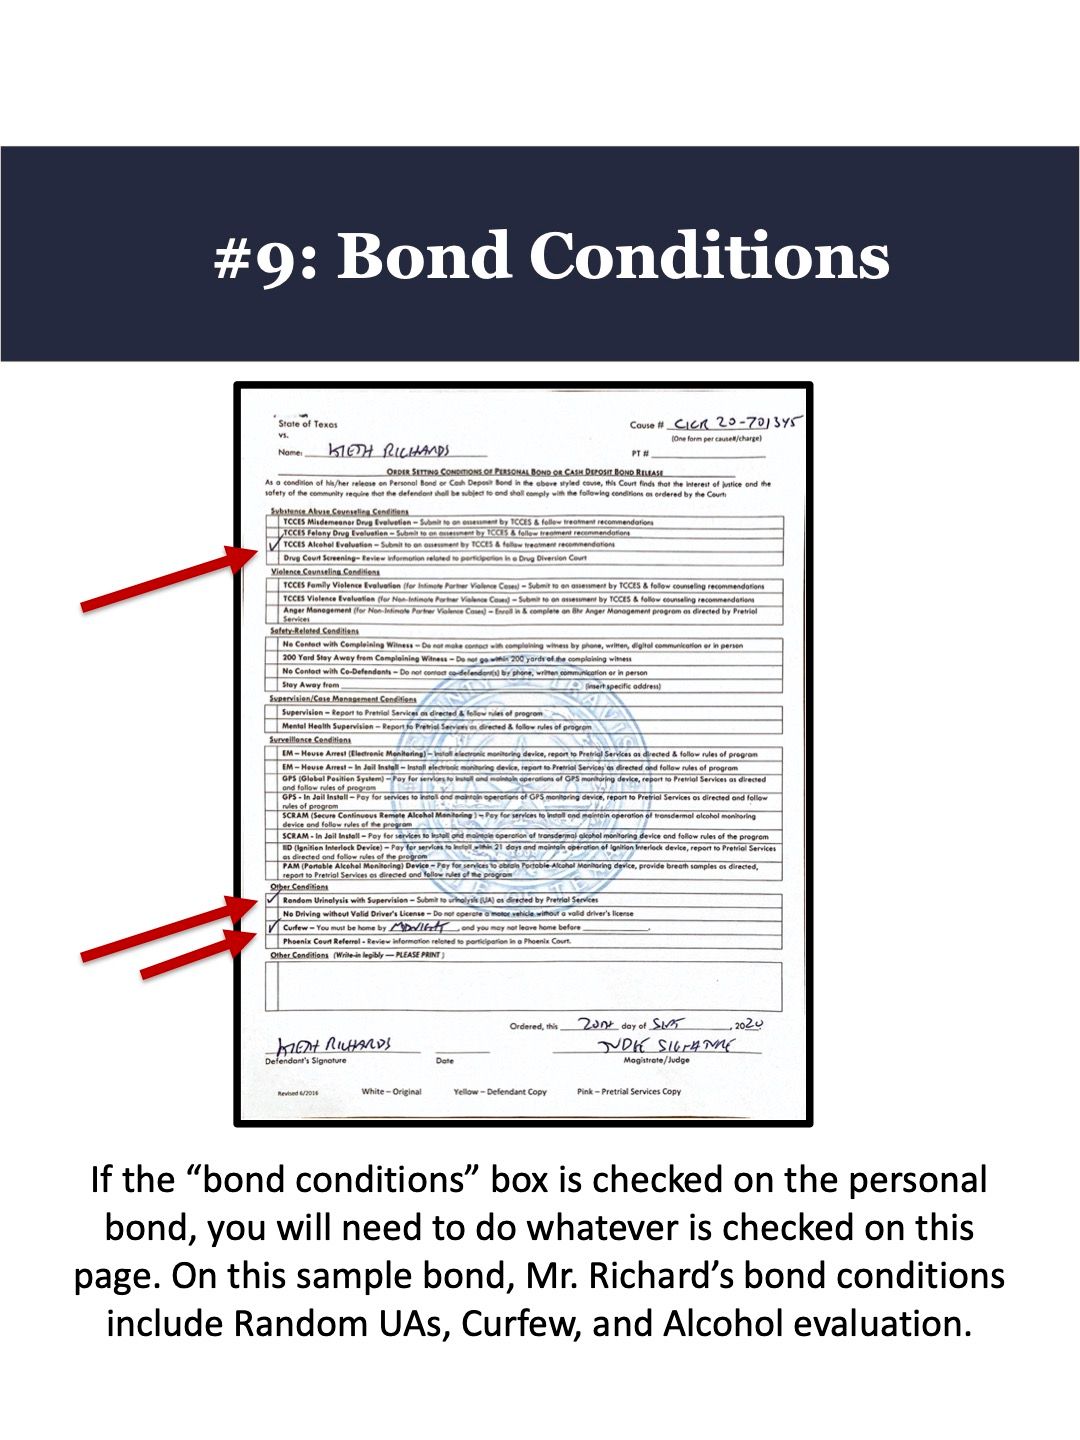 Personal Bond Guide page 10.jpg